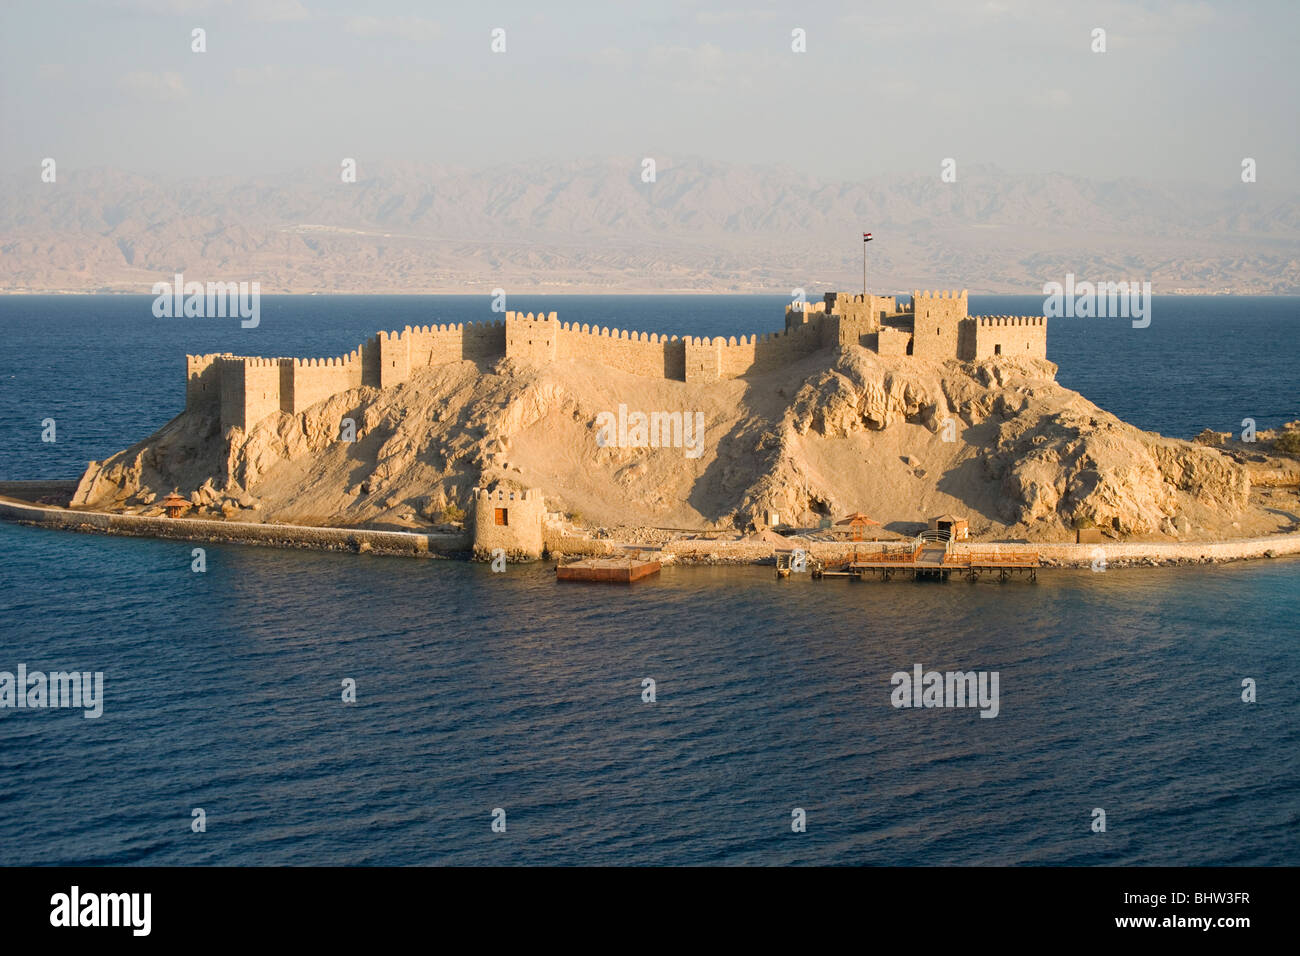 Crusaders citadel on Pharaoh's Island at sunset, offshore of the eastern Sinai Peninsula in Egypt. Stock Photo